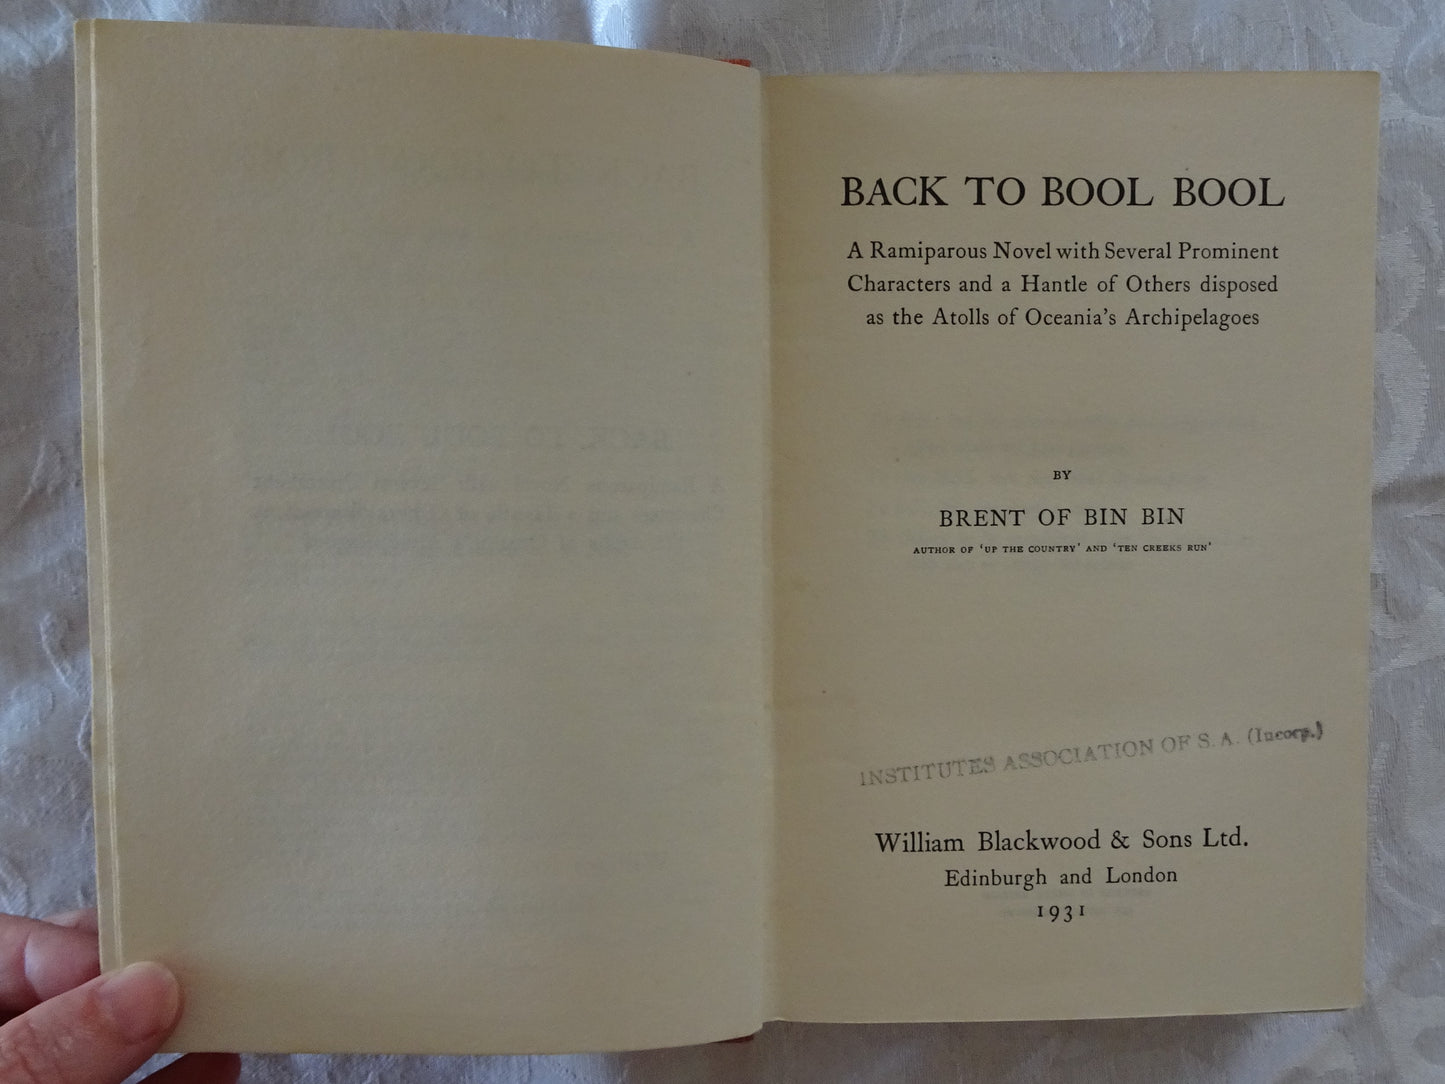 Back To Bool Bool  A Ramiparous Novel with Several Prominant Characters and a Hantle of Others disposed as the Atolls of Oceania's Archipelagoes  by Brent of Bin Bin (Miles Franklin)